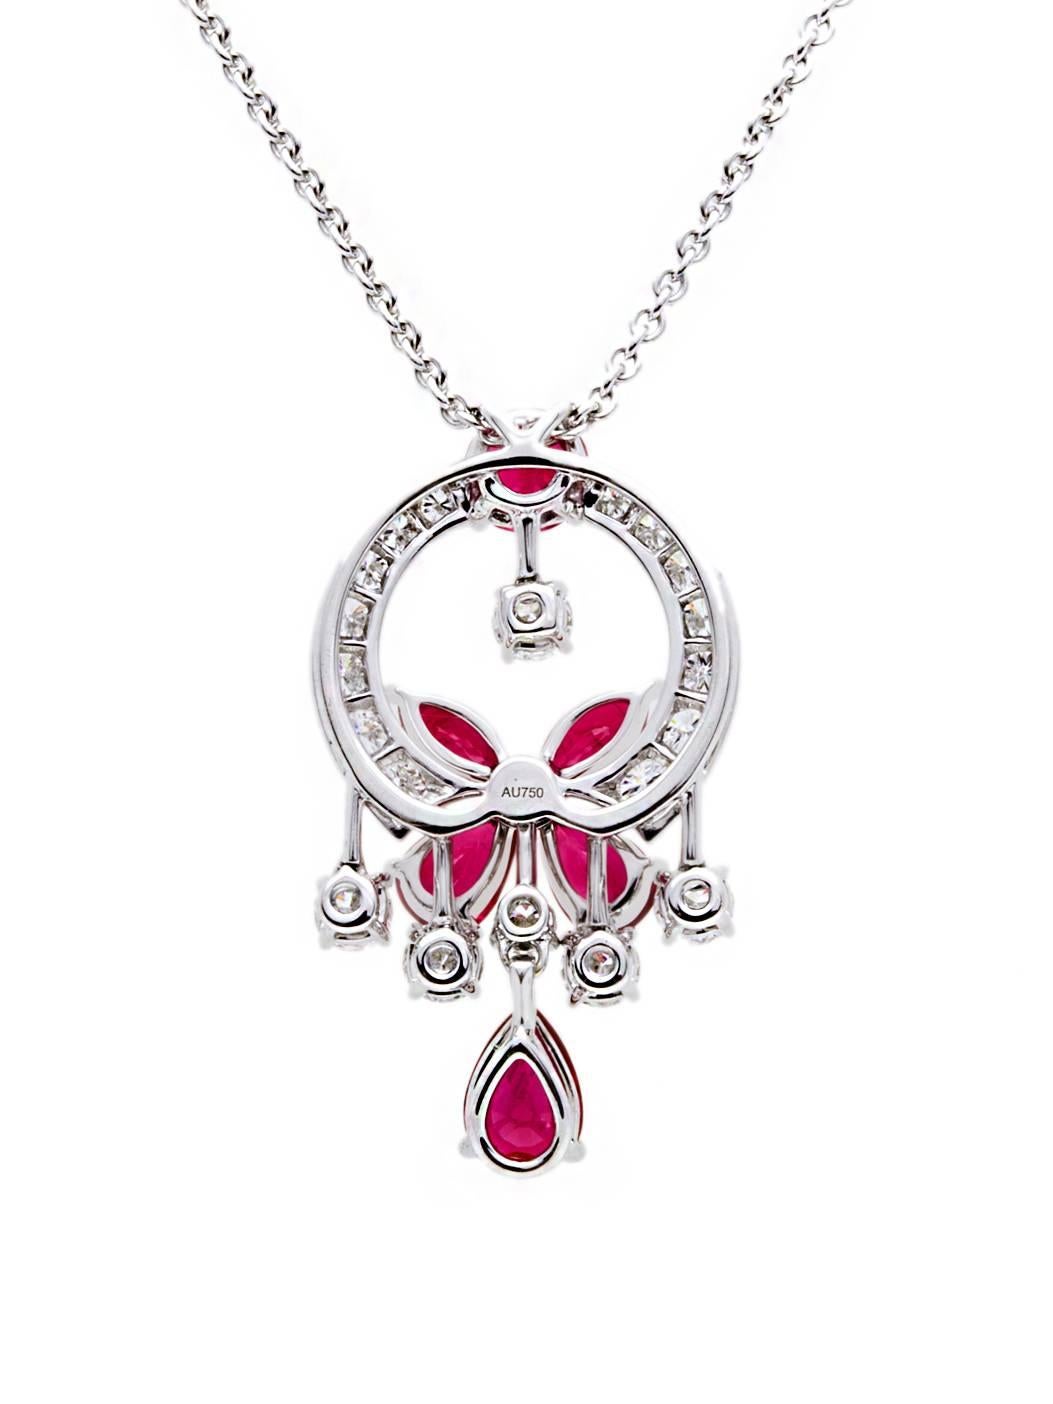 Graff Classic Butterfly Pendant in 18K White Gold. Total Diamonds Weight 1.28 carat, Total Ruby Weight 2.83 carat. The pendant comes on a Graff 18K White Gold 17